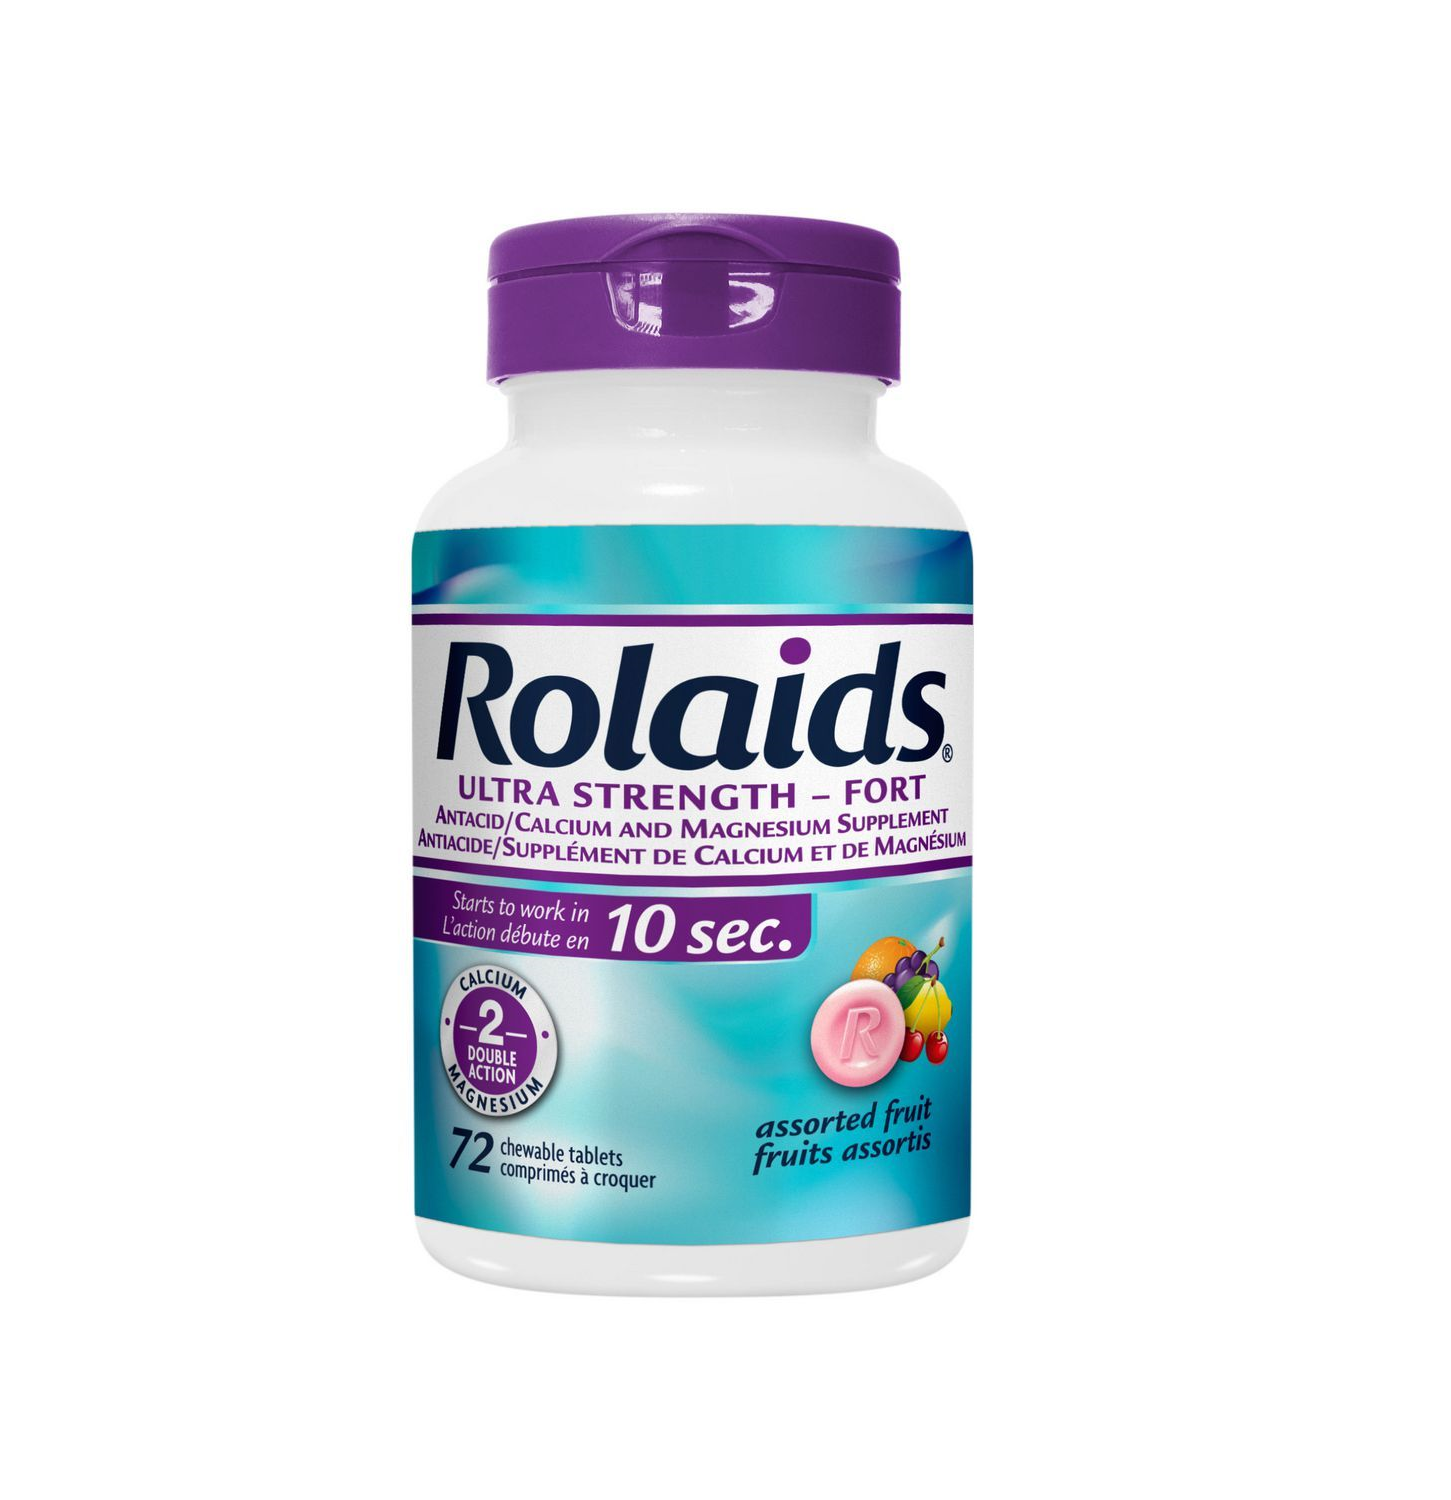 Rolaids Ultra Strength 72 Chewable Tablets Assorted Fruit